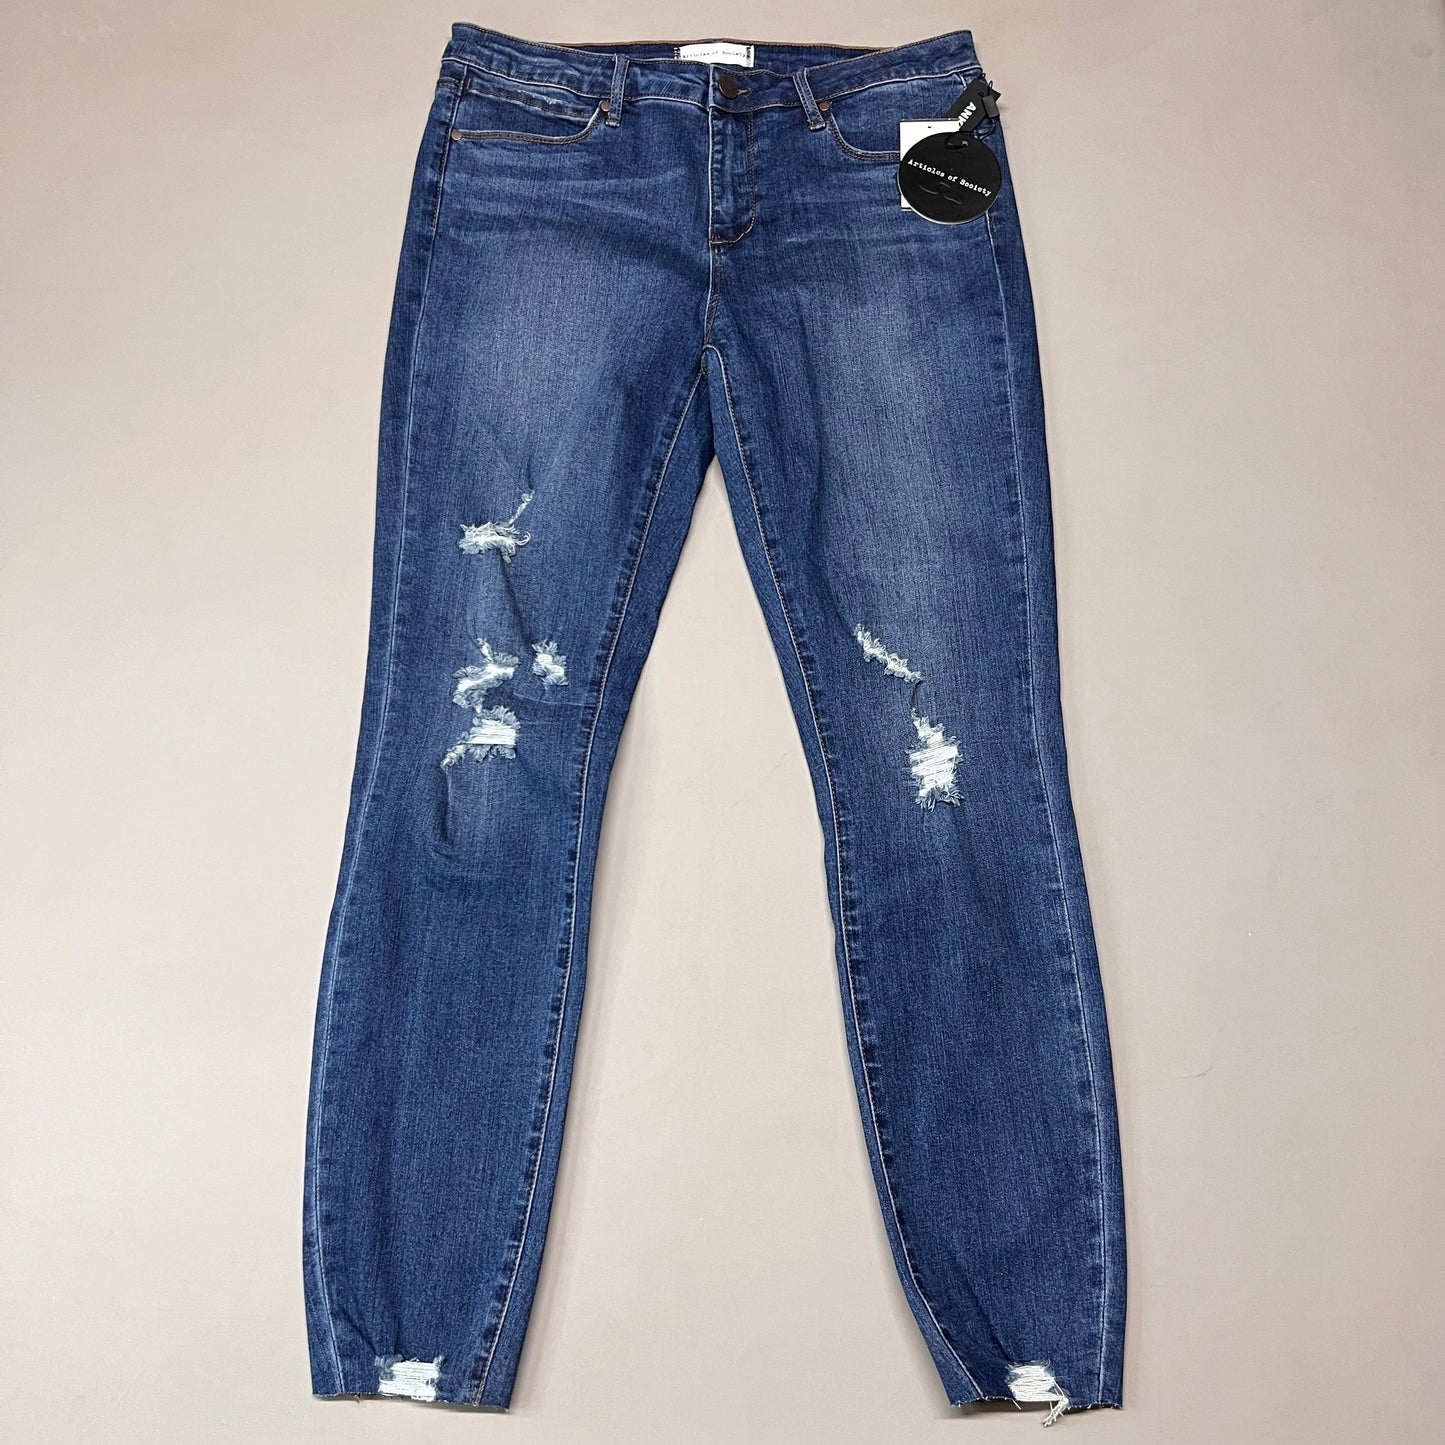 ARTICLES OF SOCIETY Hilo Ripped Denim Jeans Women's Sz 32 Blue 5350PLV-706 (New)